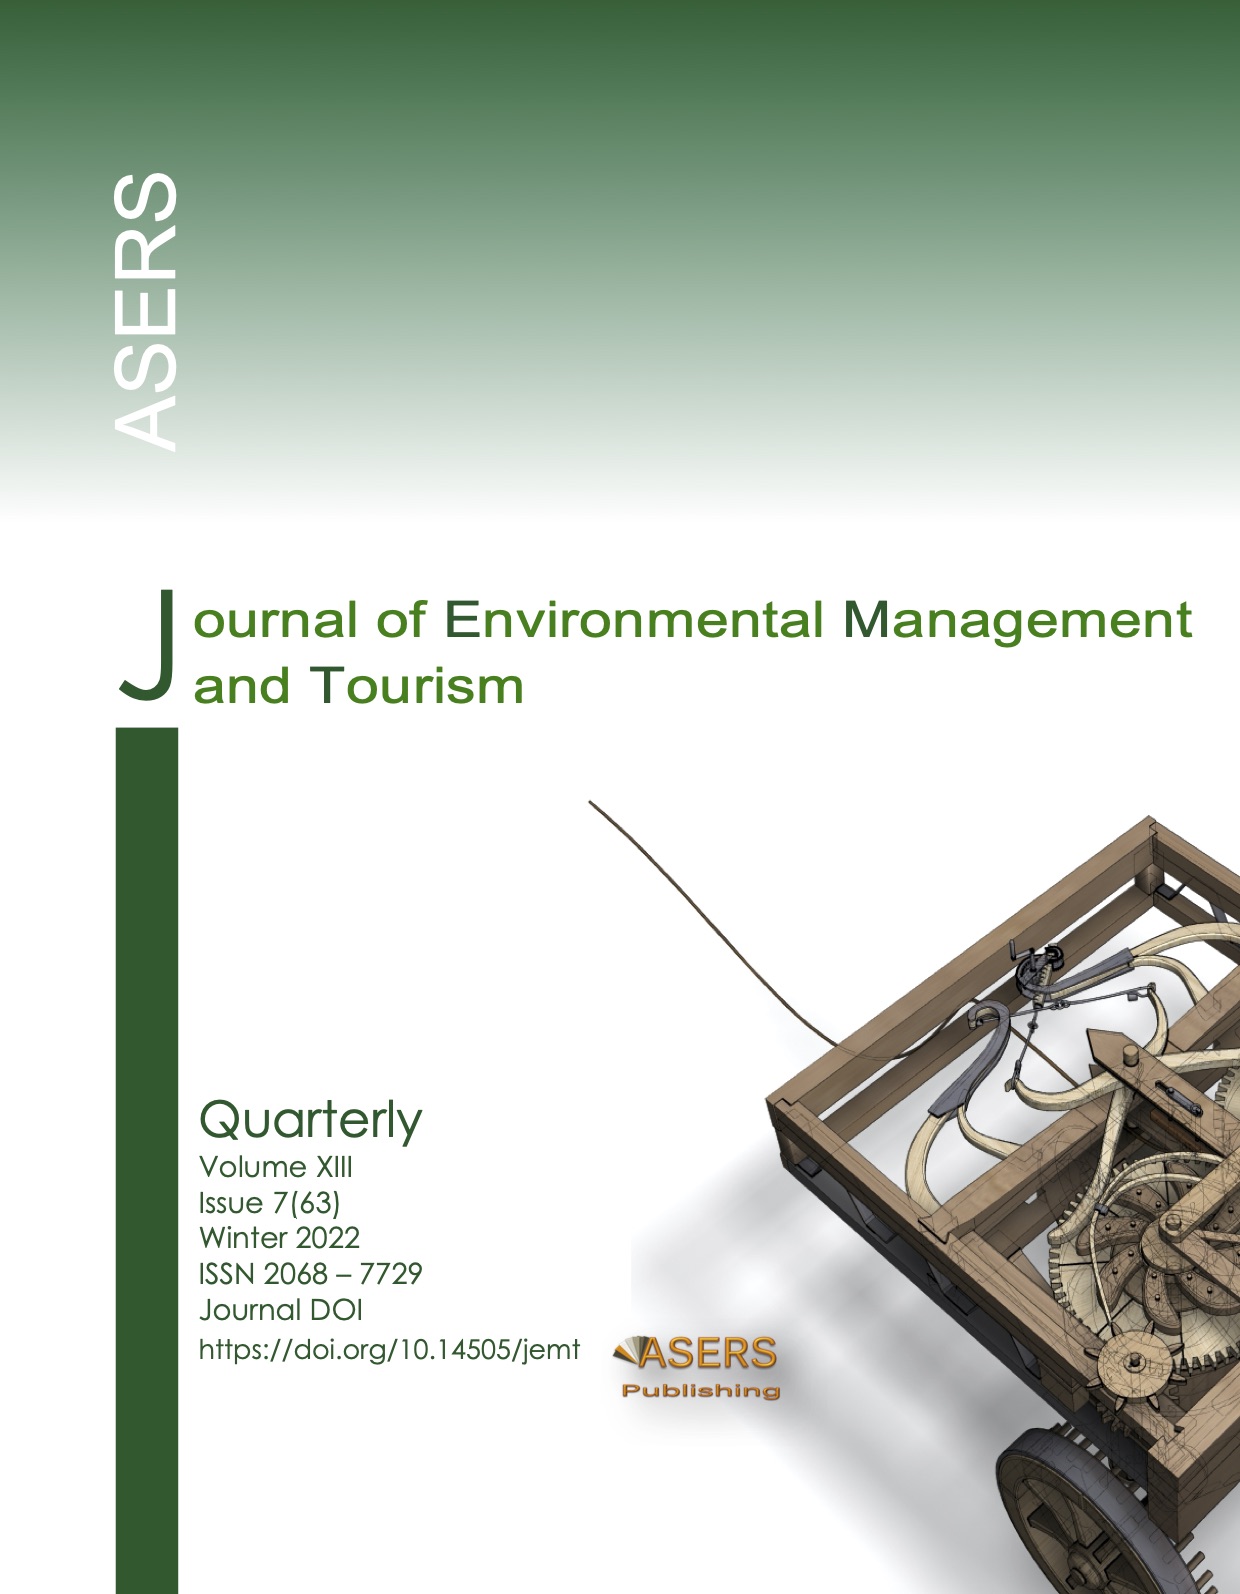 The Role of the Public Administration in Protecting the Environment from Pollution